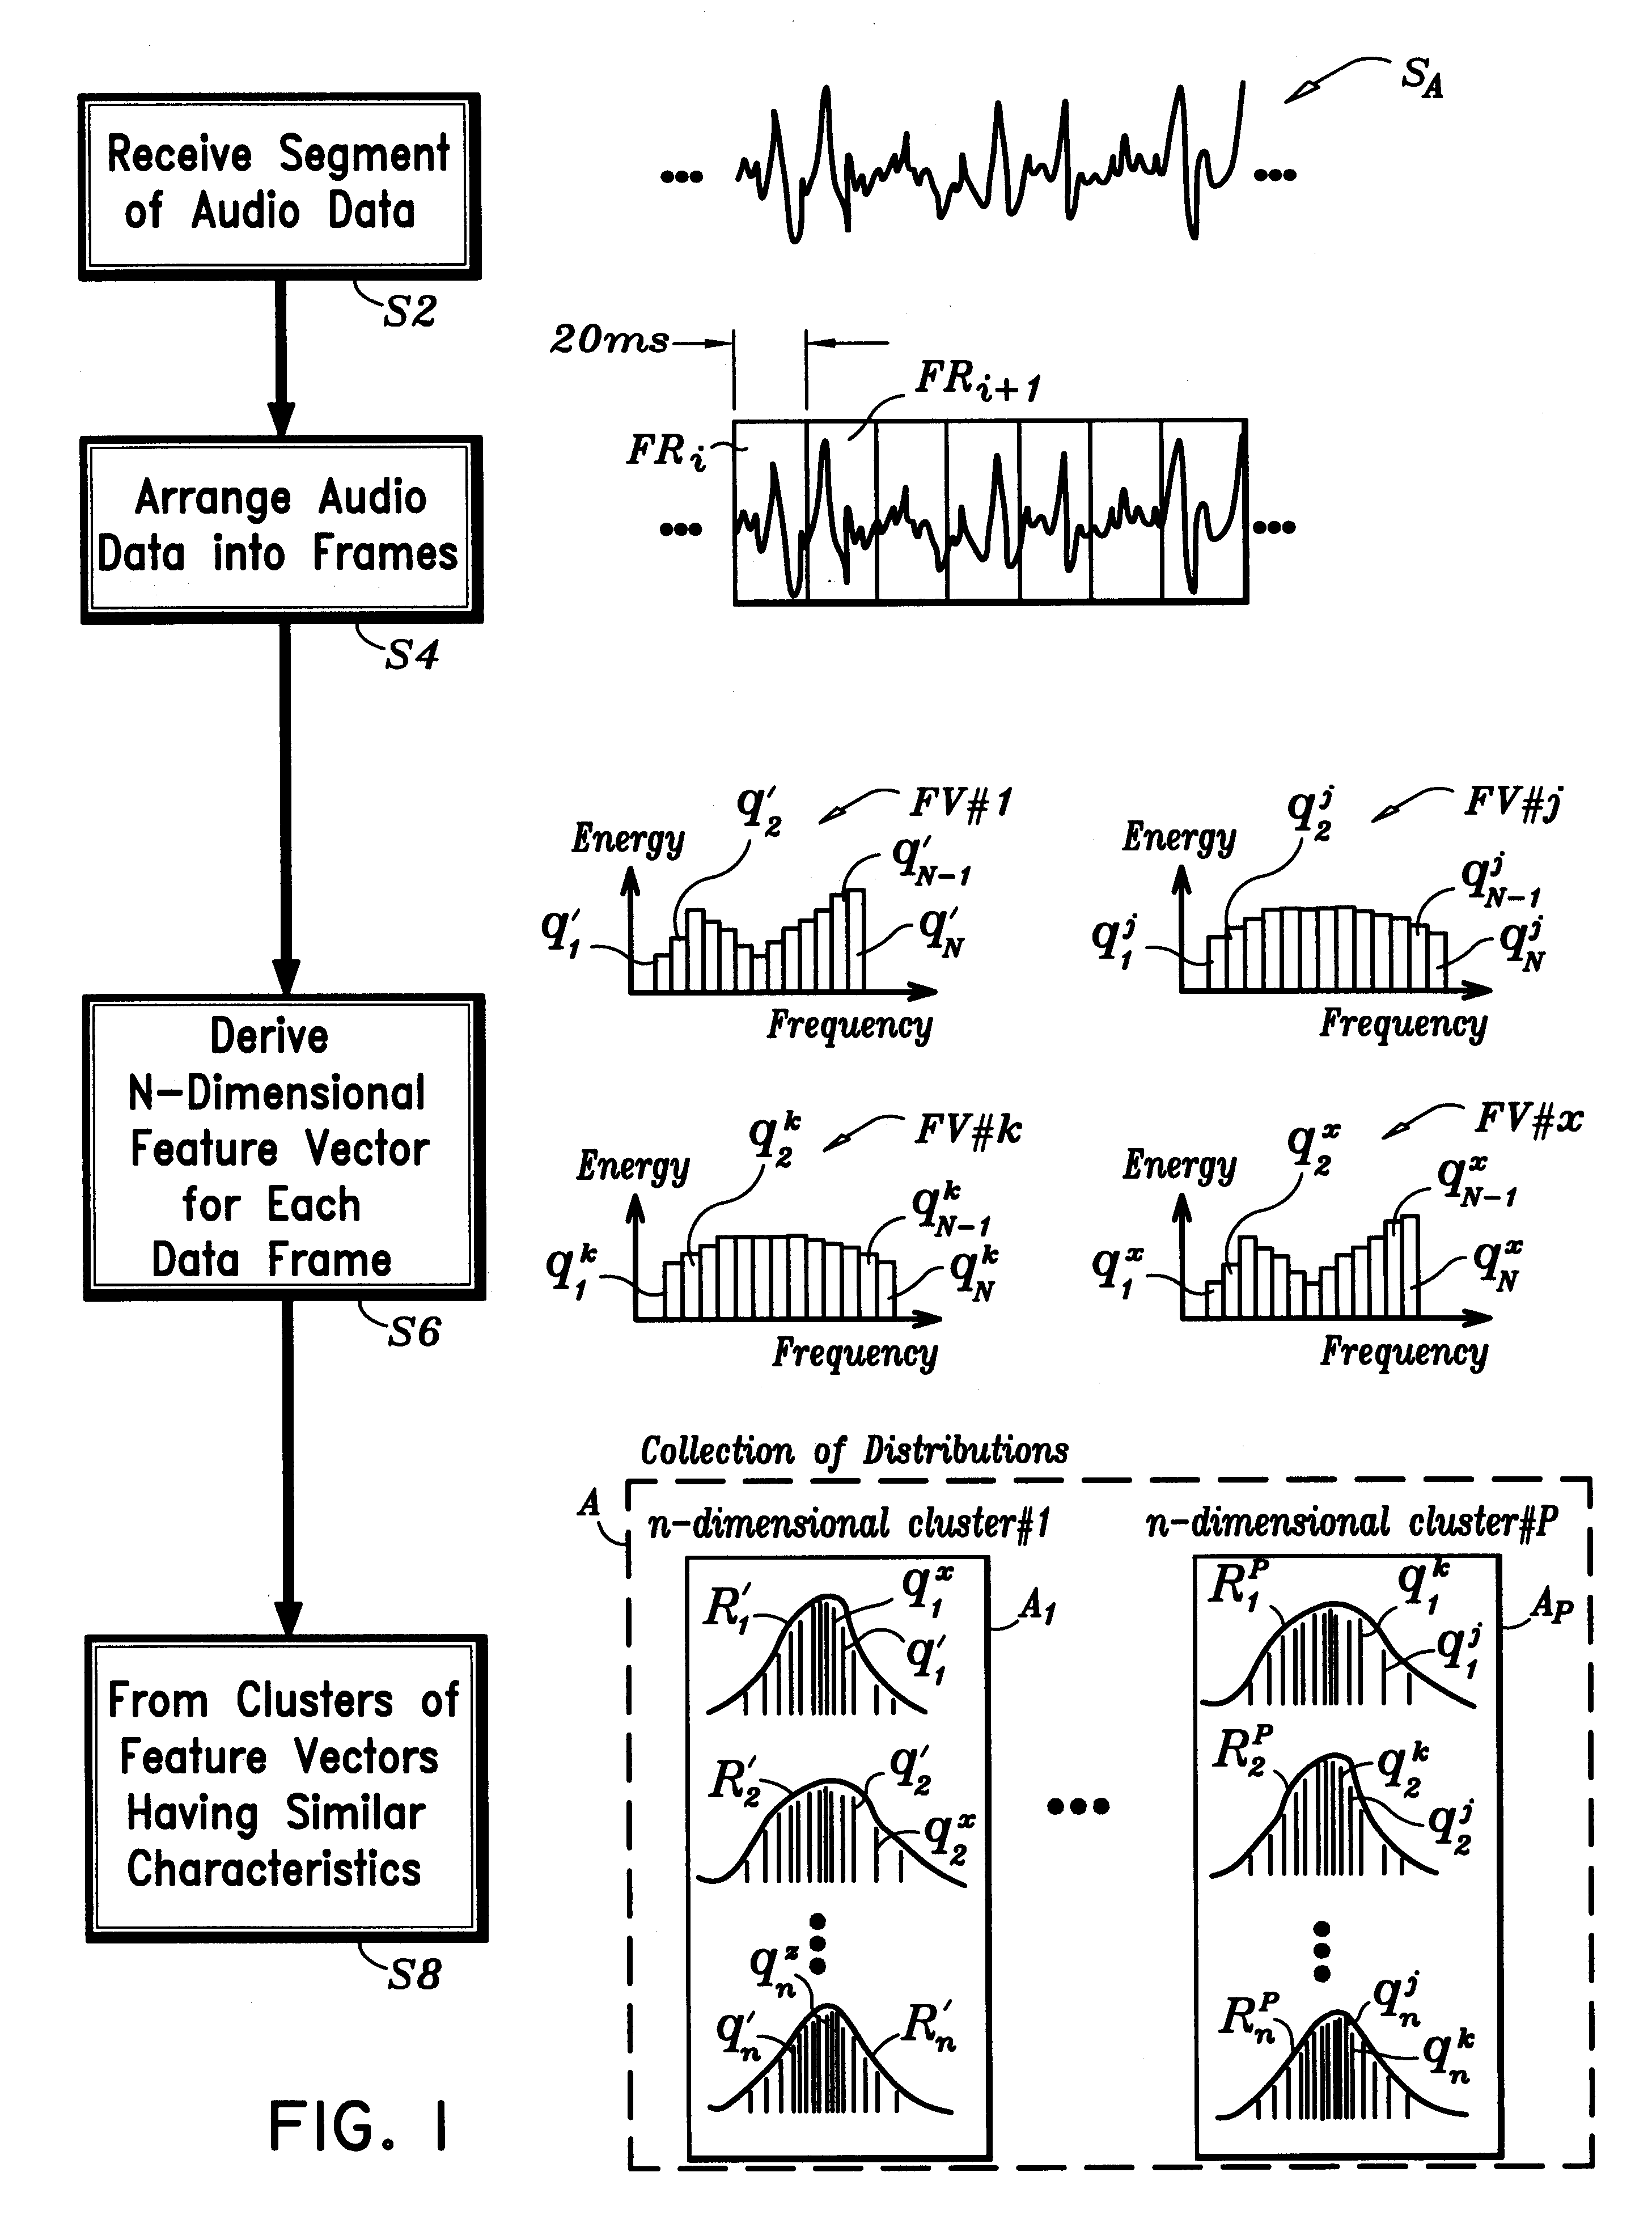 Method for measuring distance between collections of distributions